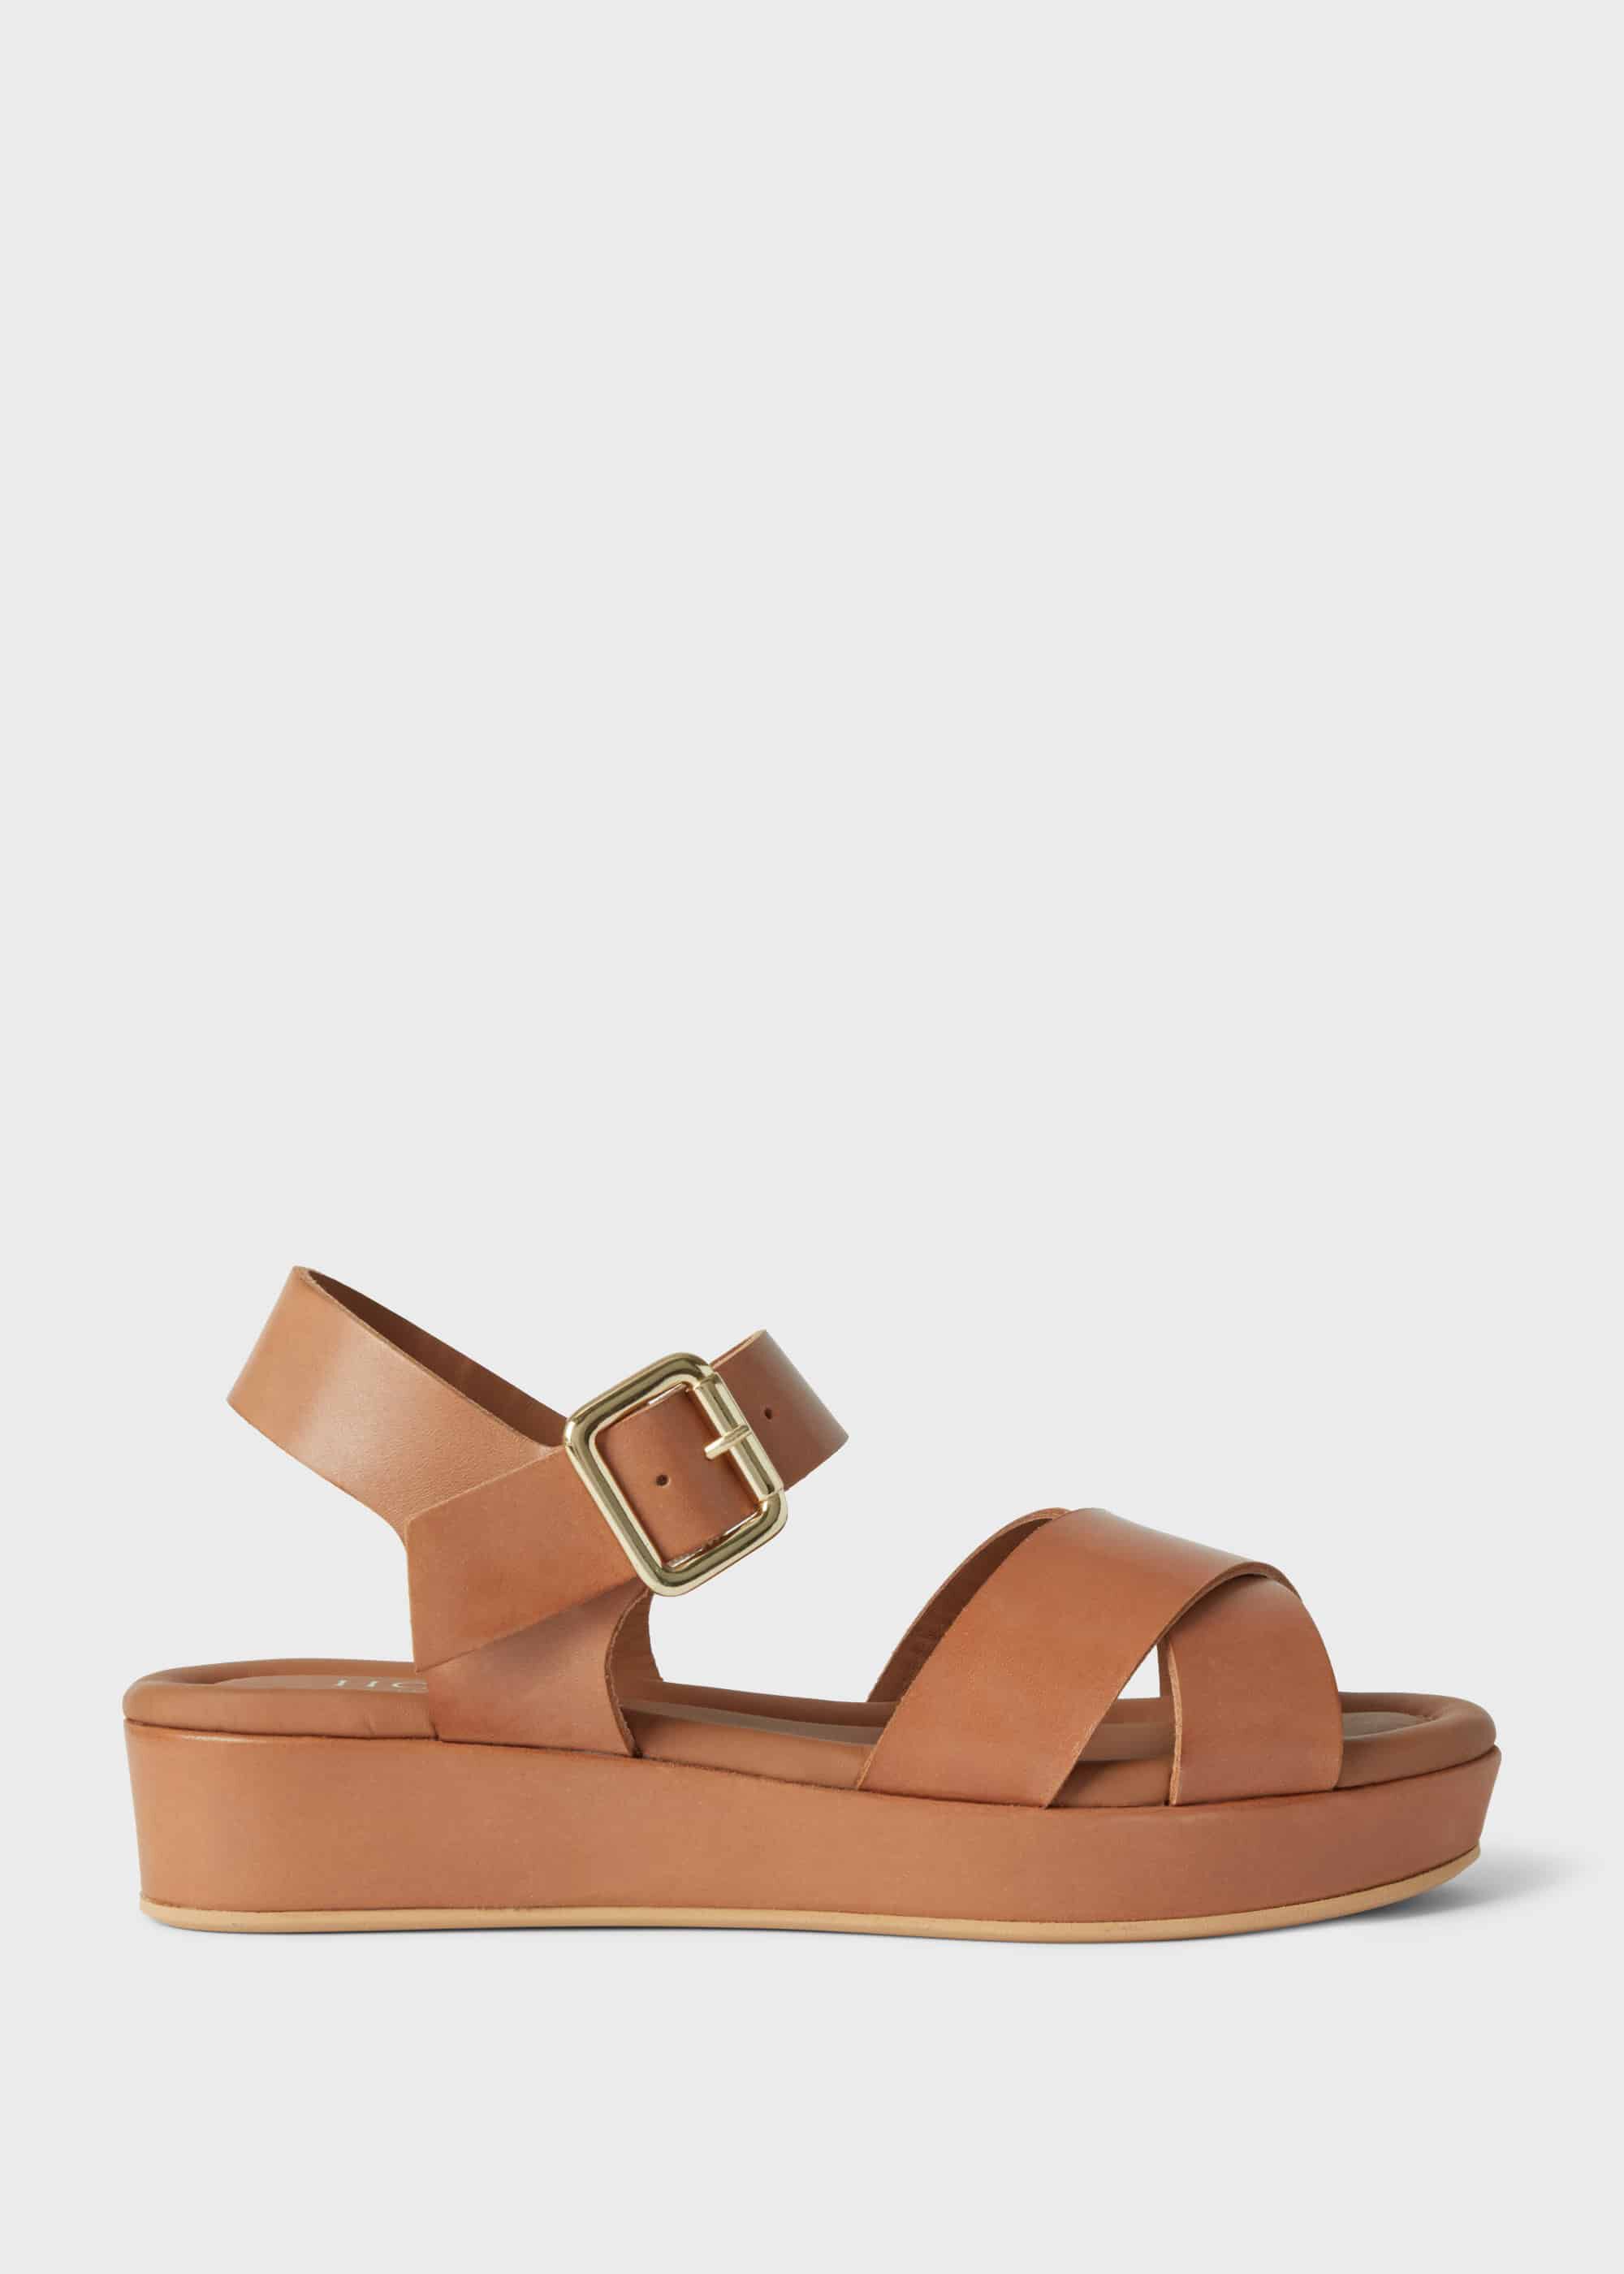 white holiday sandals